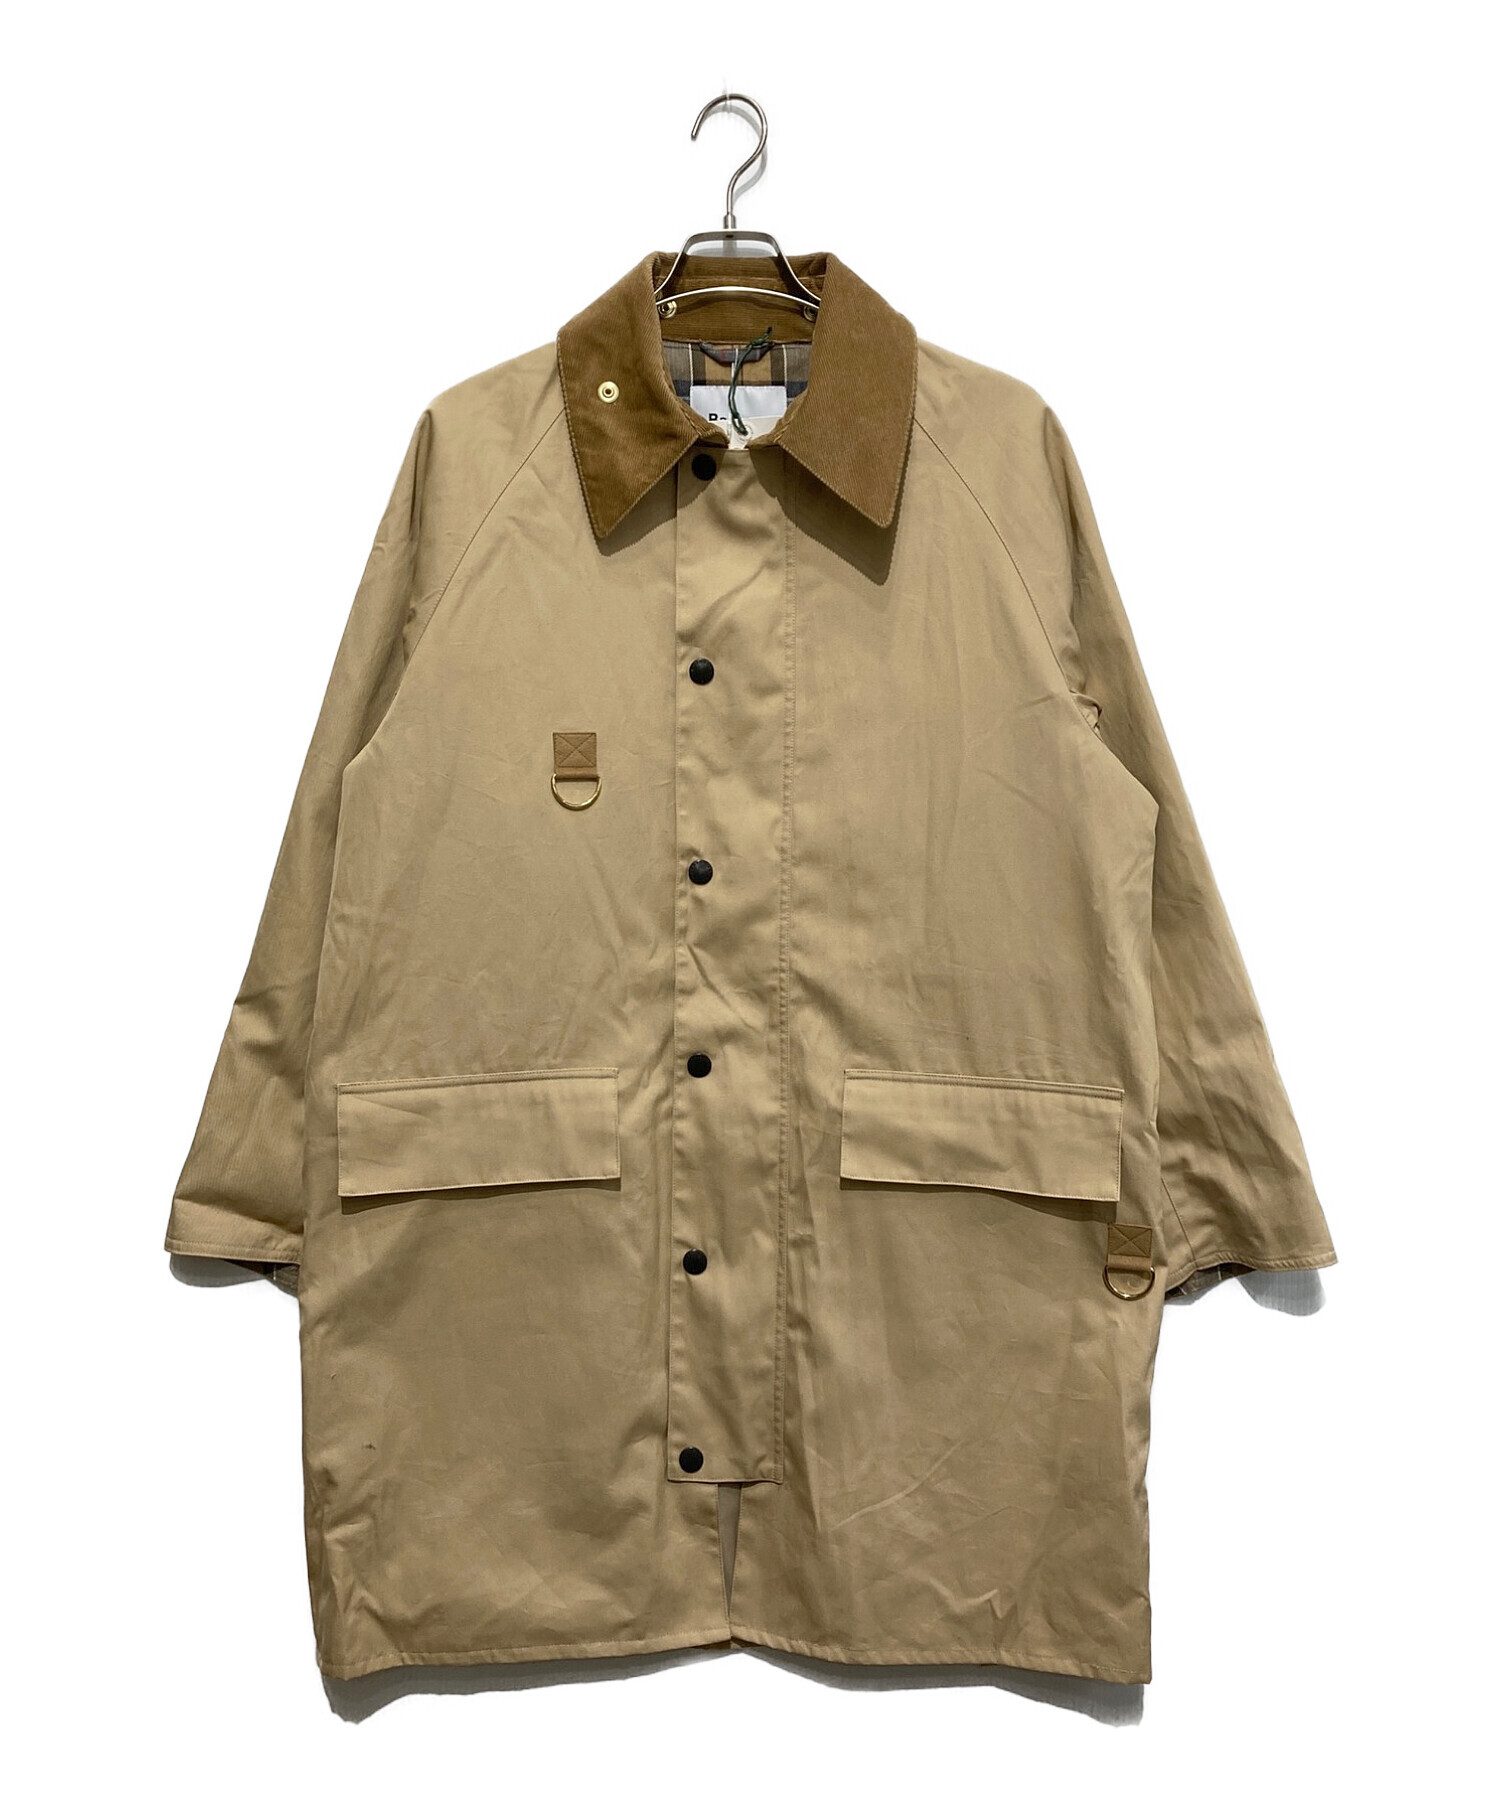 【Barbour for TRAVELCOUTURE】SPEY LONG